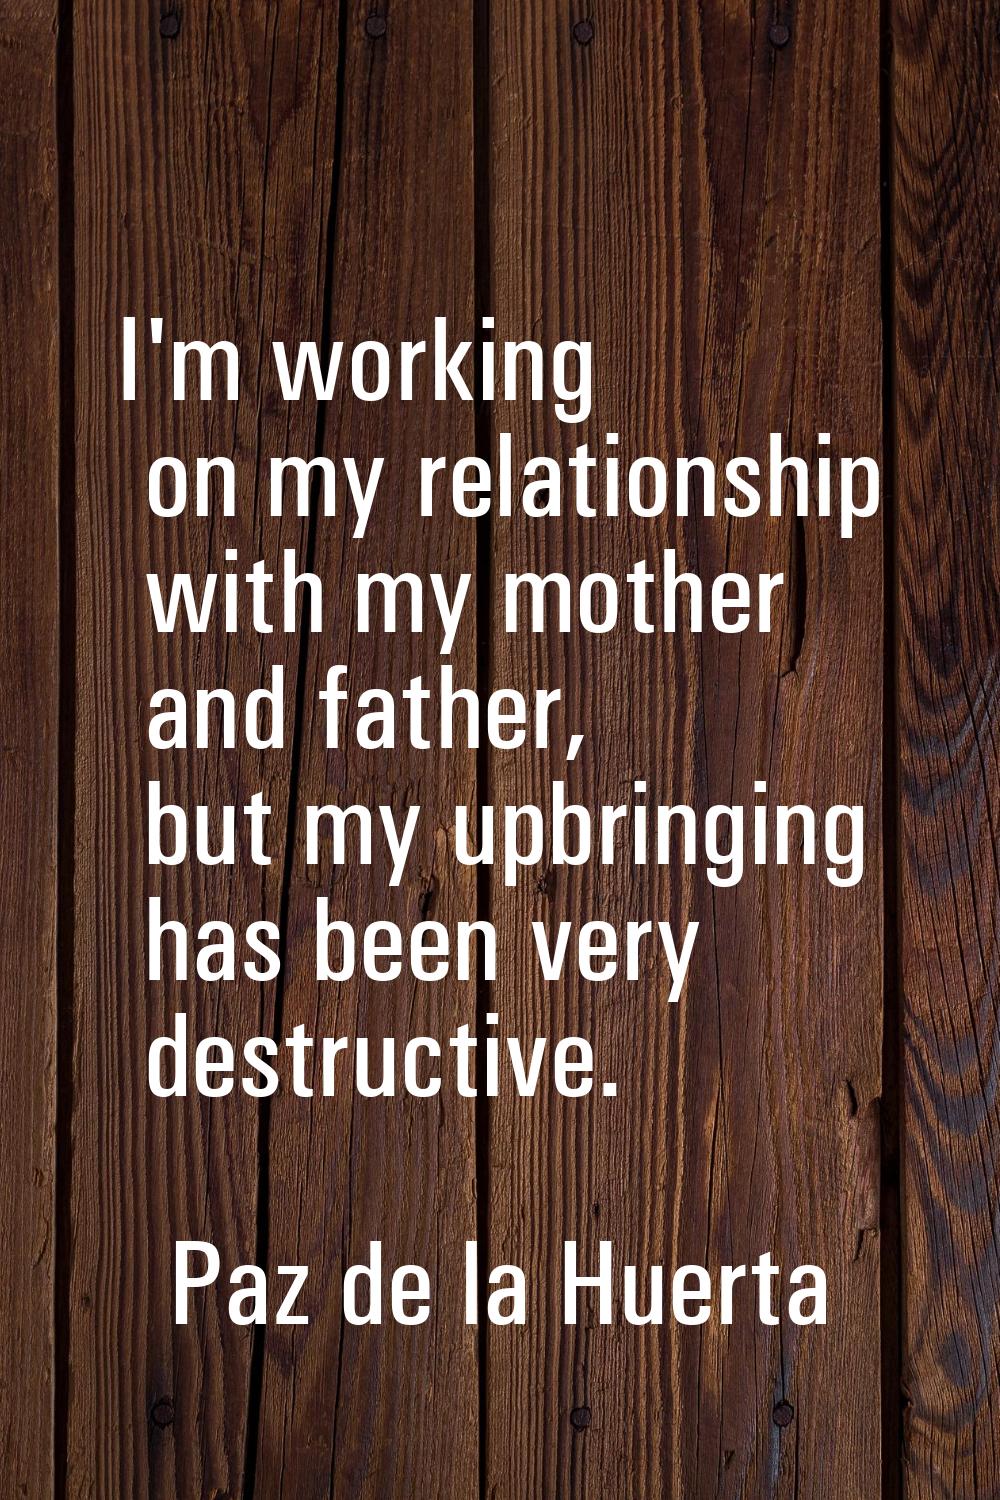 I'm working on my relationship with my mother and father, but my upbringing has been very destructi